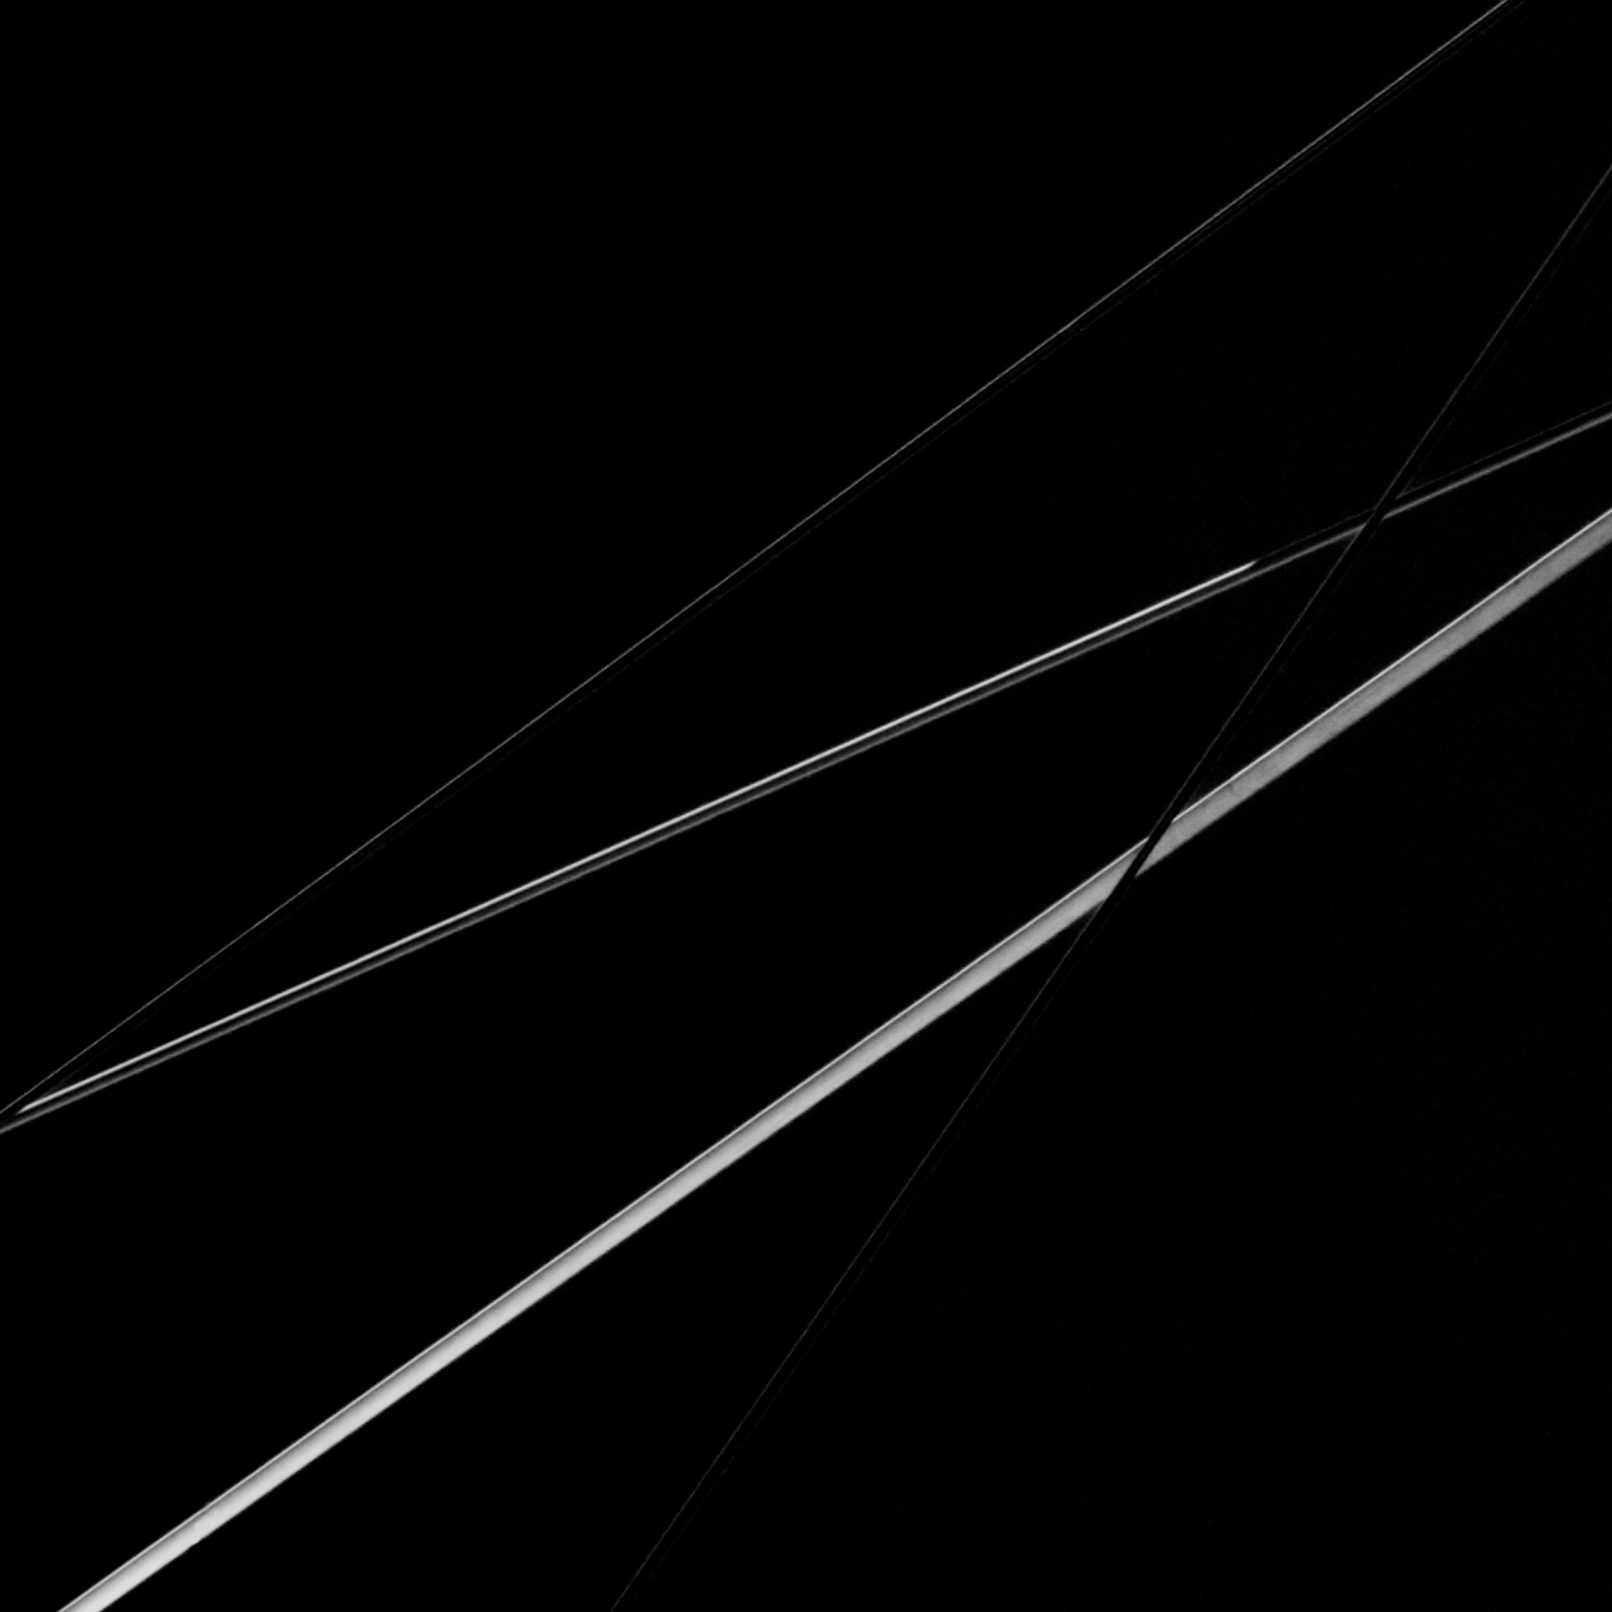 Cables abstract